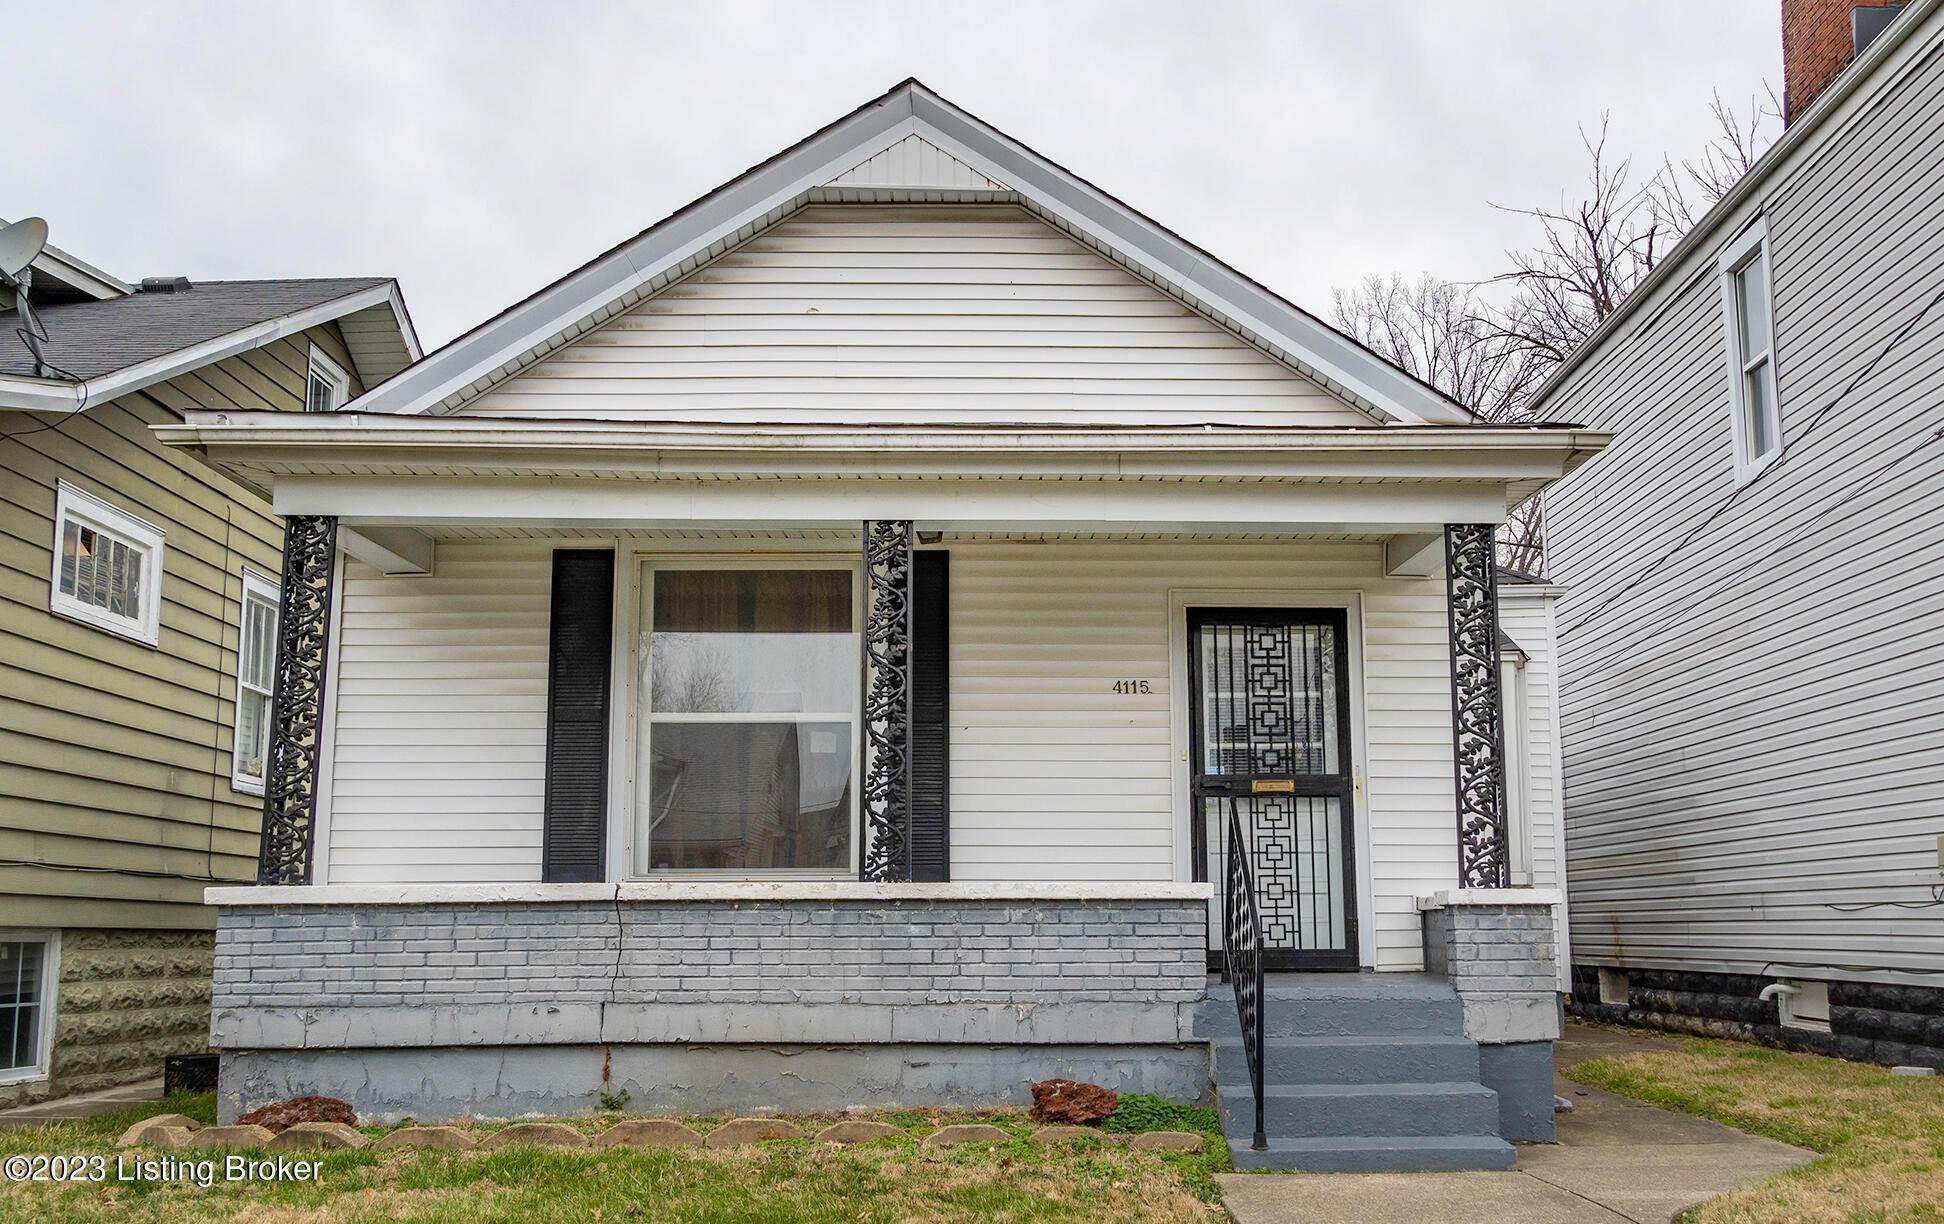 Single Family at Louisville, KY 40211